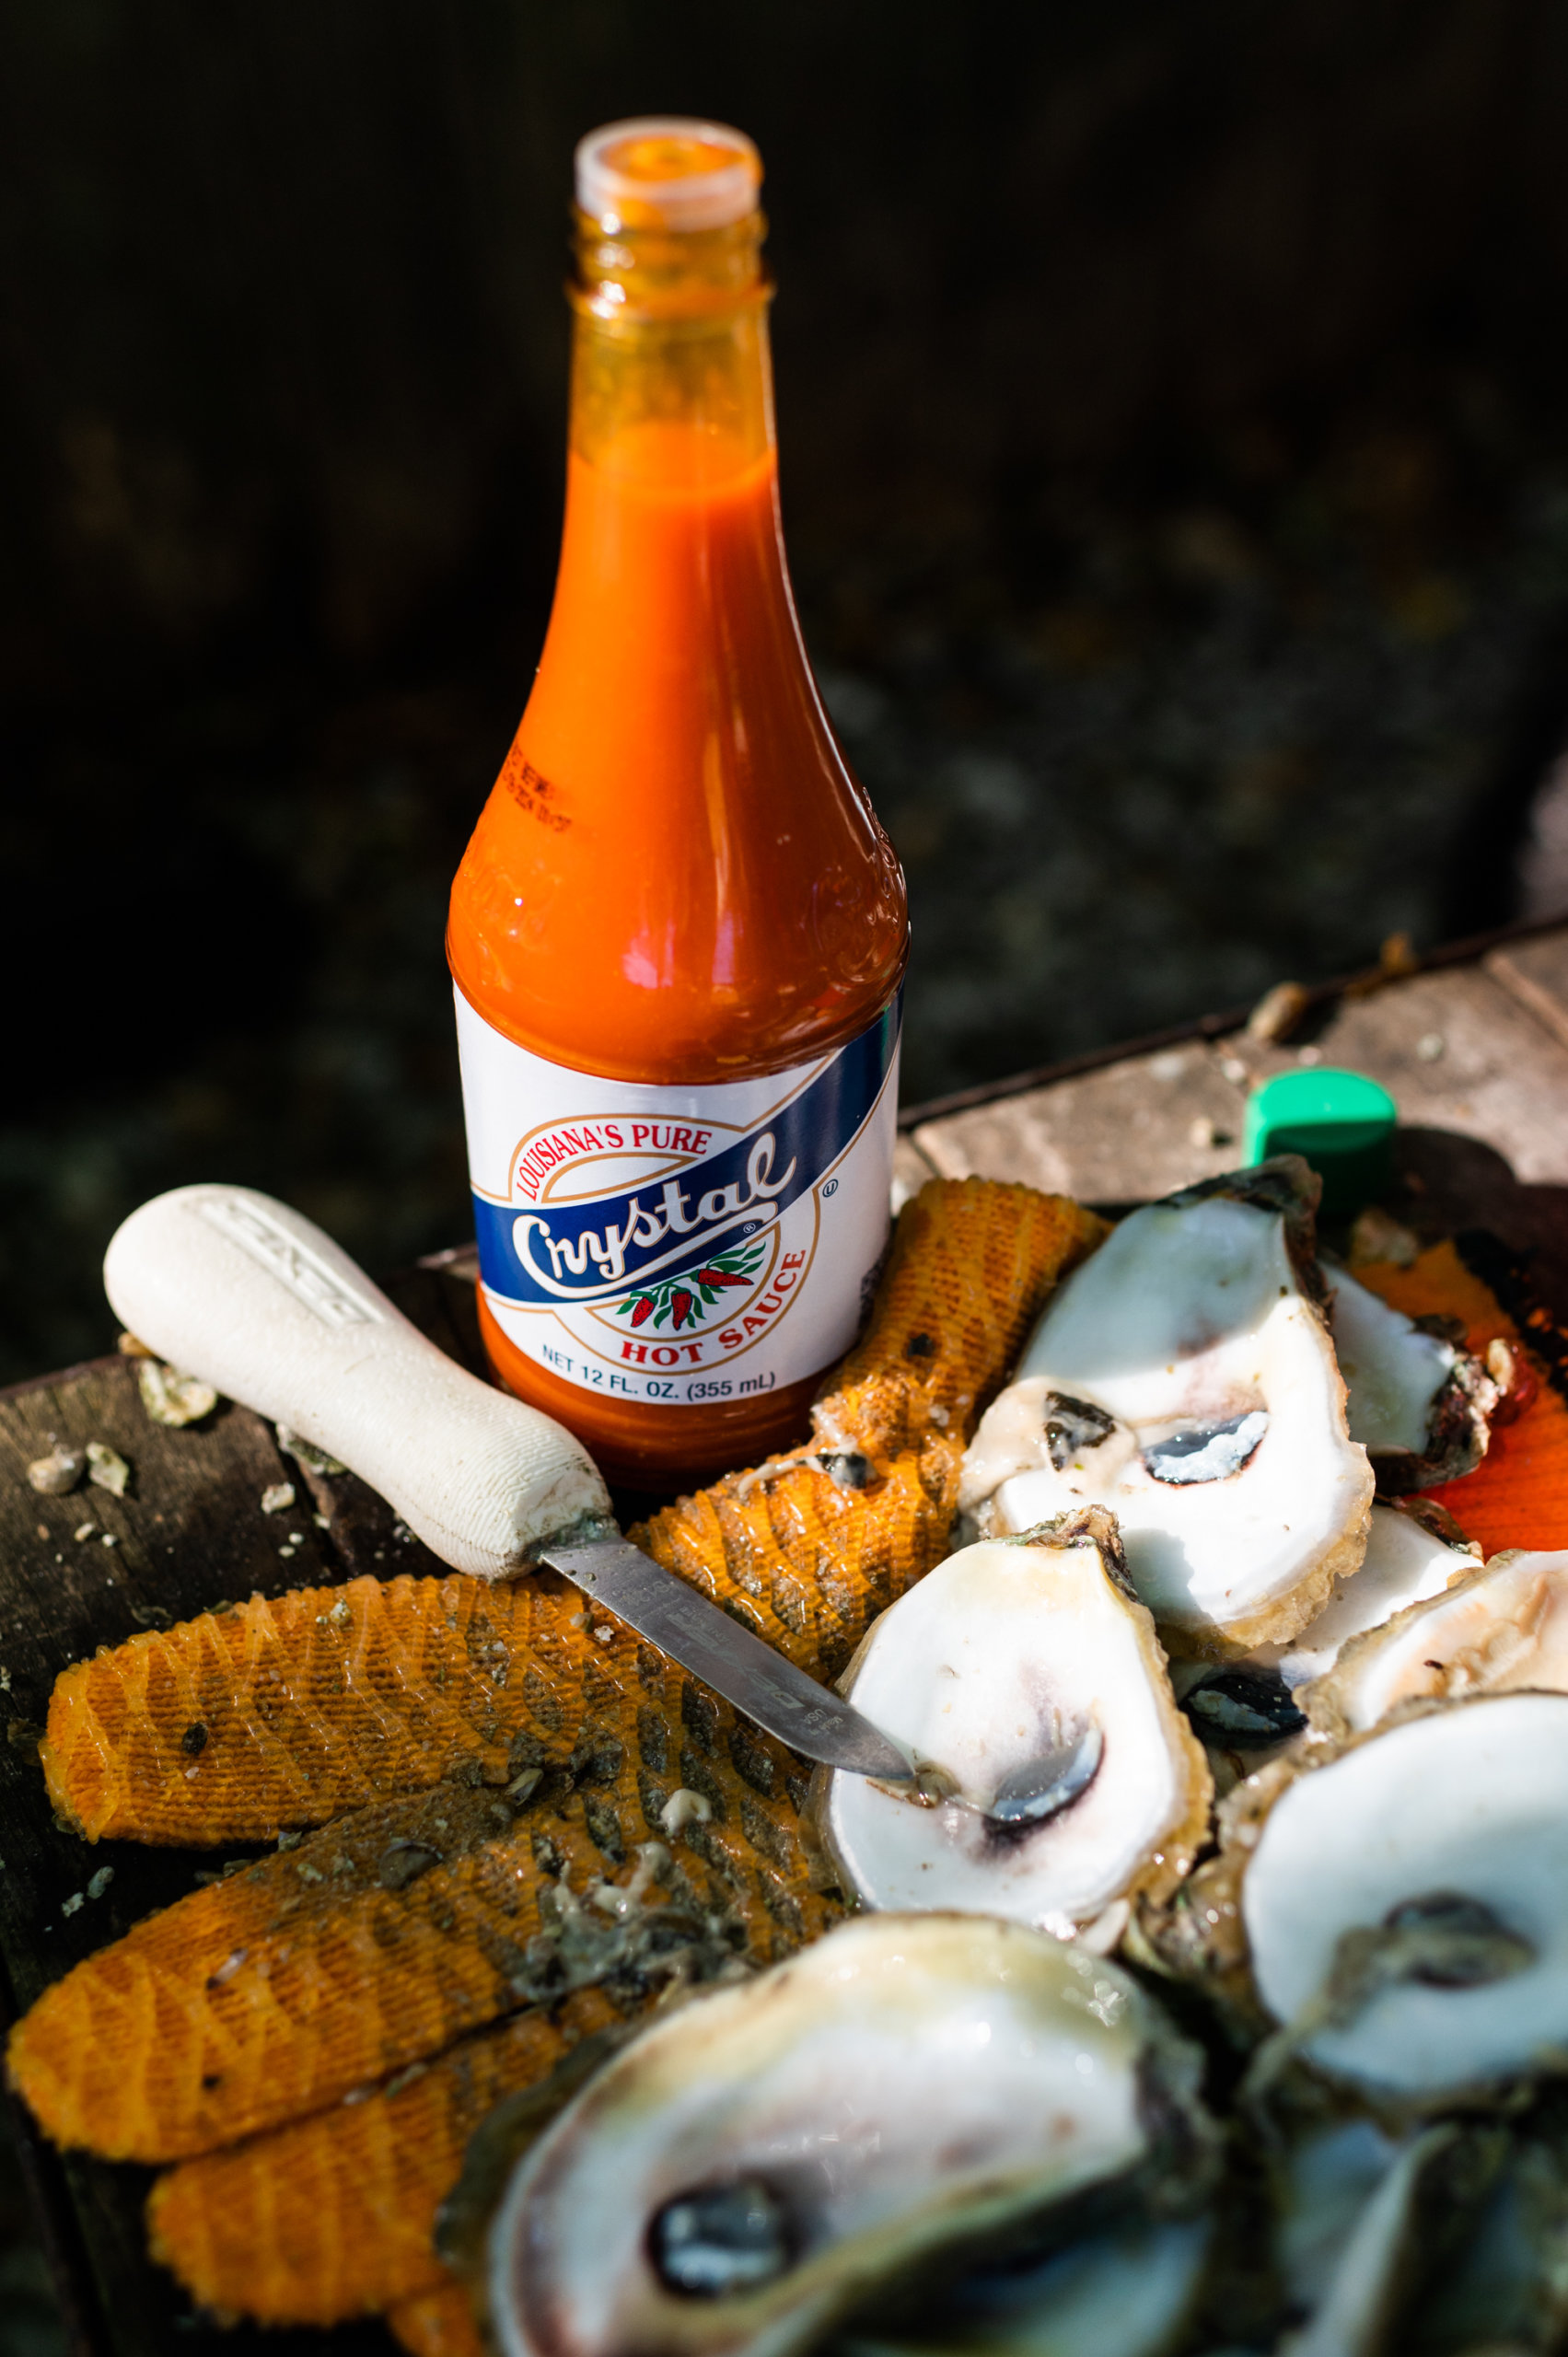 A bottle of Crystal next to freshly-shucked oysters